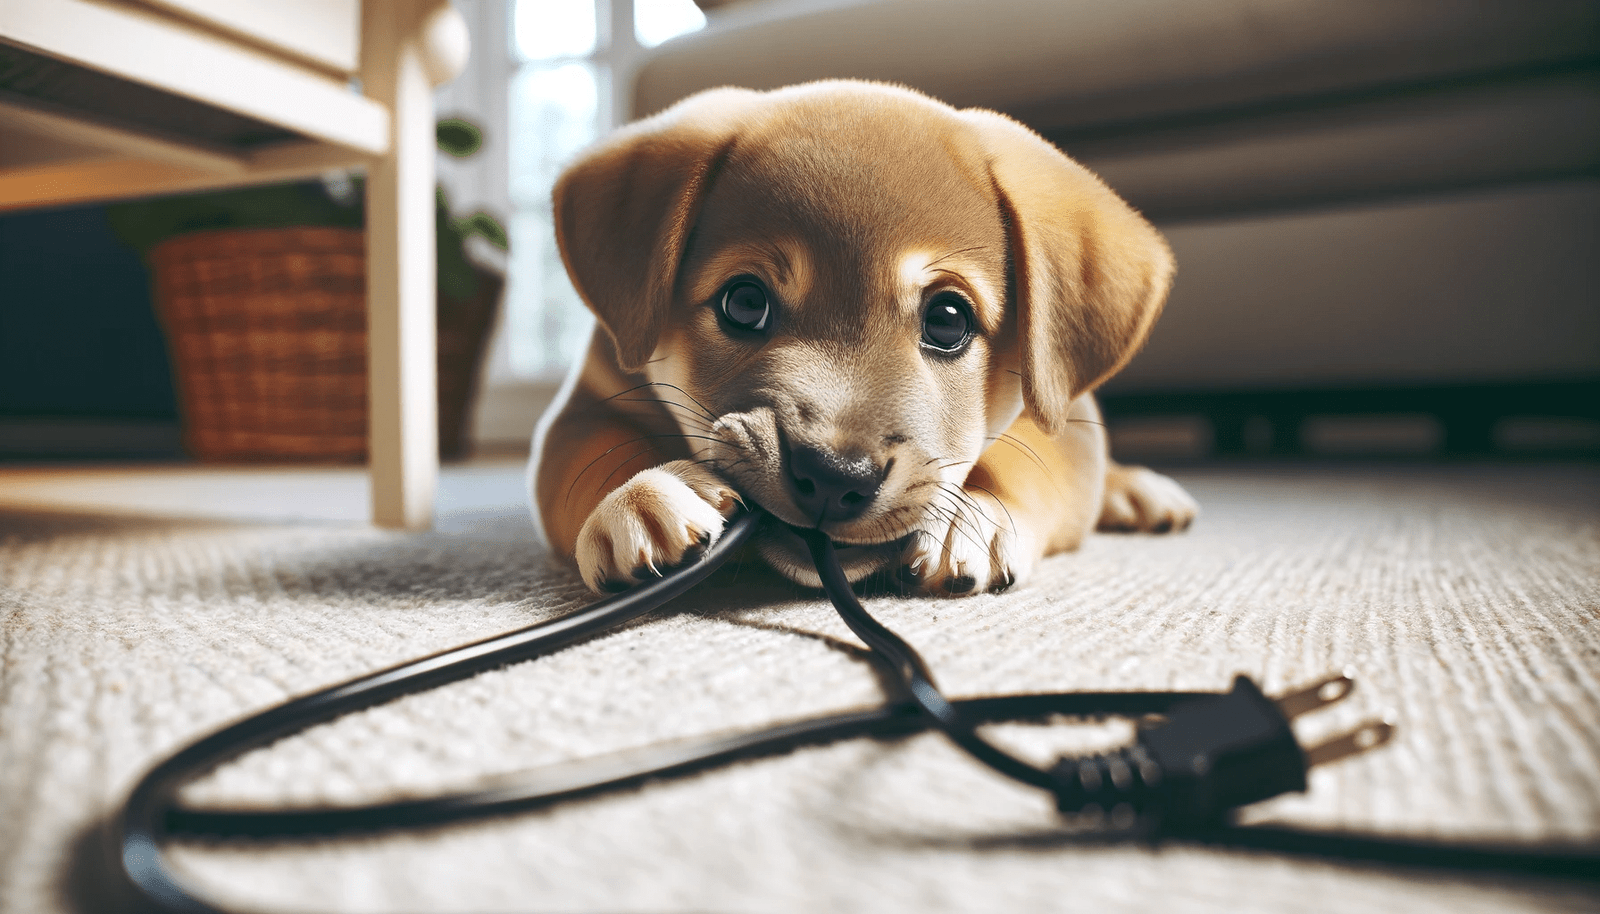 A photo-realistic image depicting a puppy chewing an electrical cord.